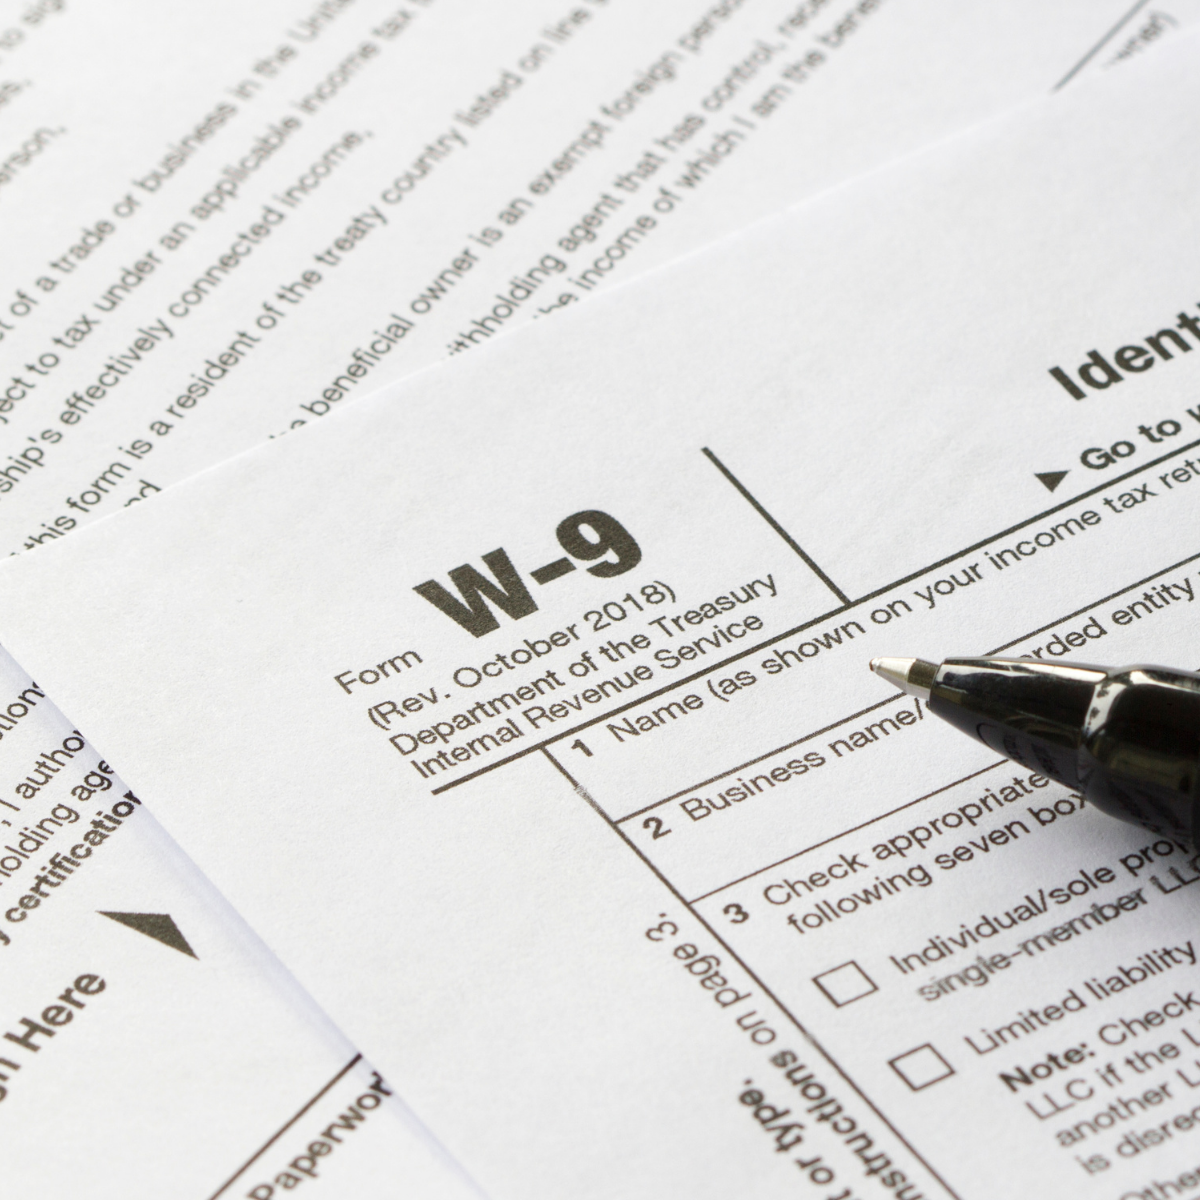 IRS Form W-9: What is a W-9? How to fill & complete a W-9